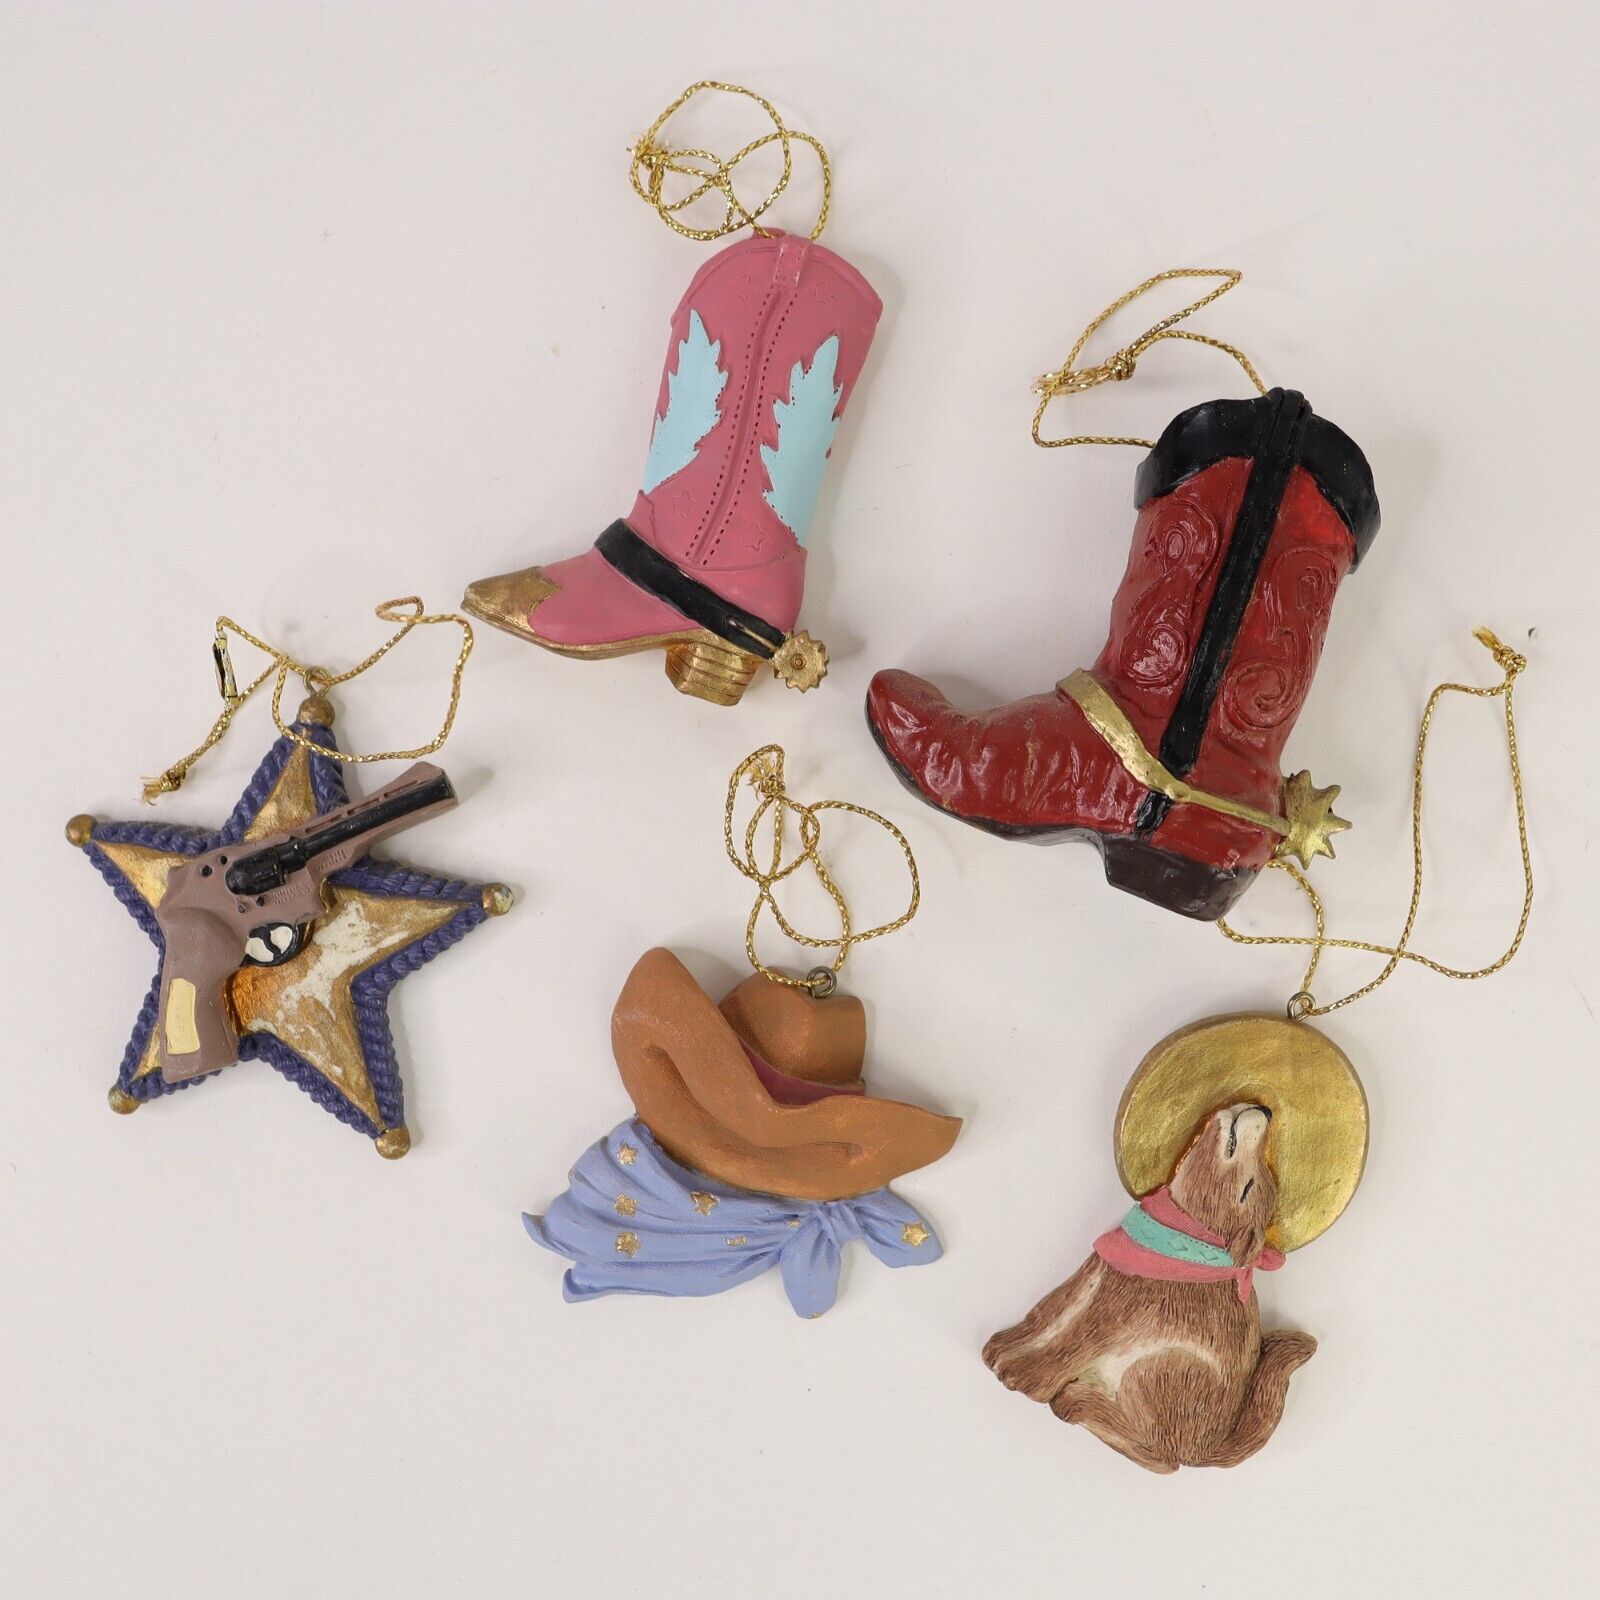 Lot of 5 Vintage Cowboy Cowgirl Hat Boot Dog Christmas Ornaments Holiday